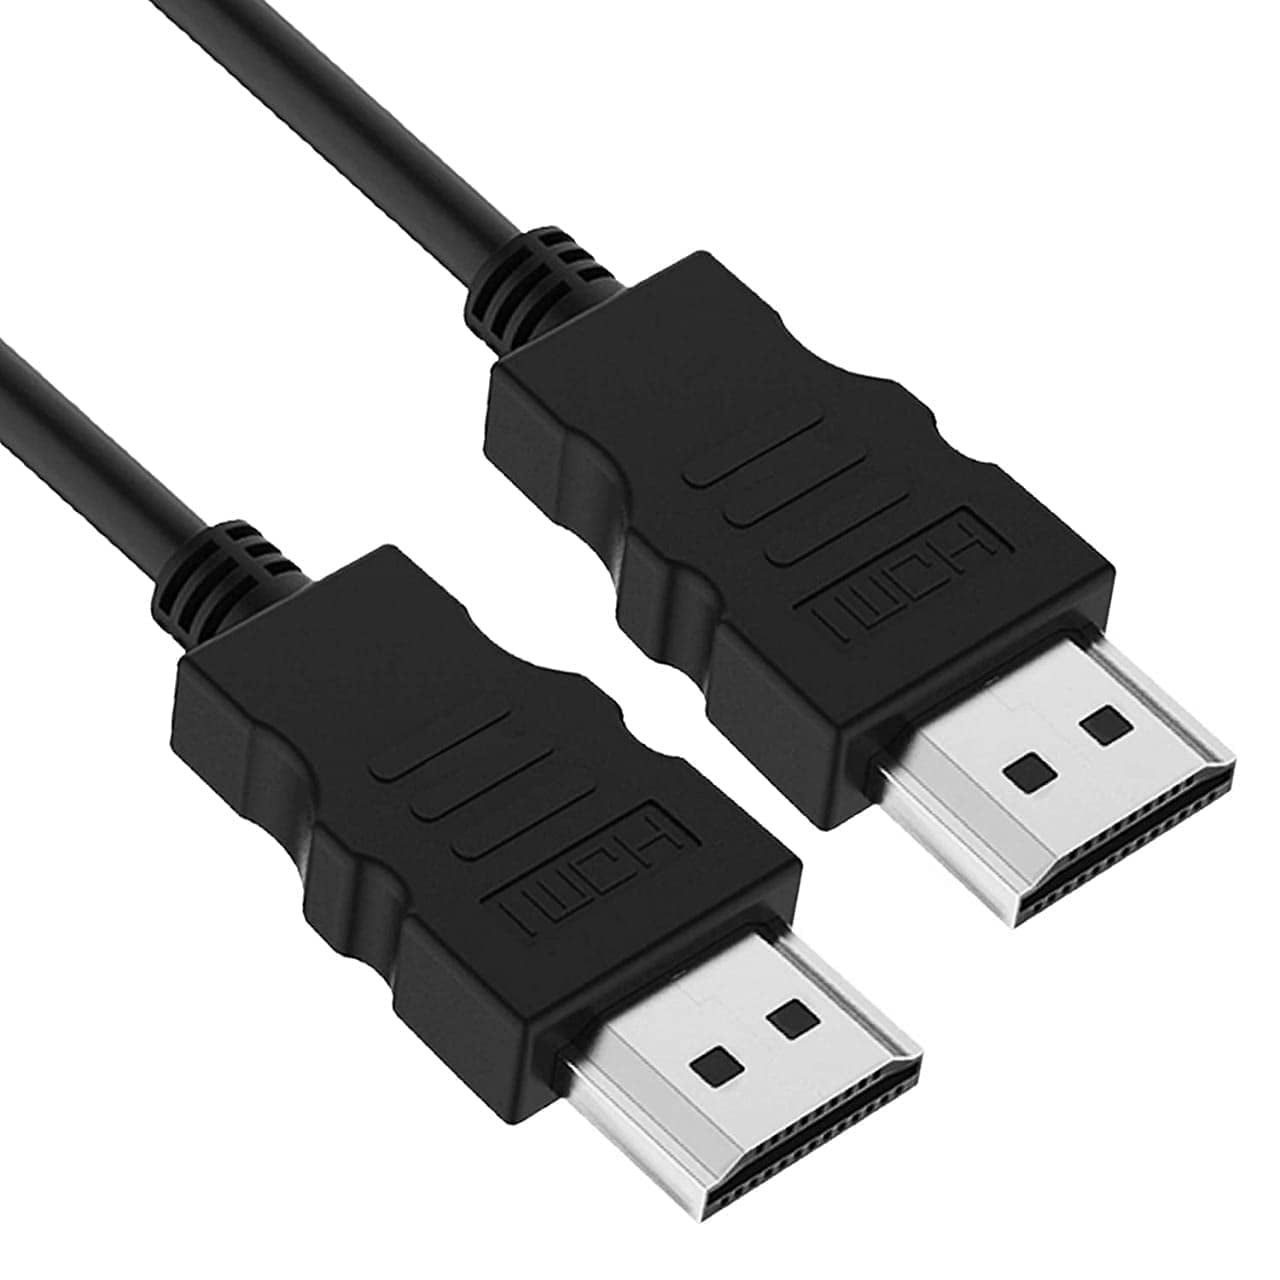 RCA Audio 4 Foot Ultra High Speed 8K HDMI Cable